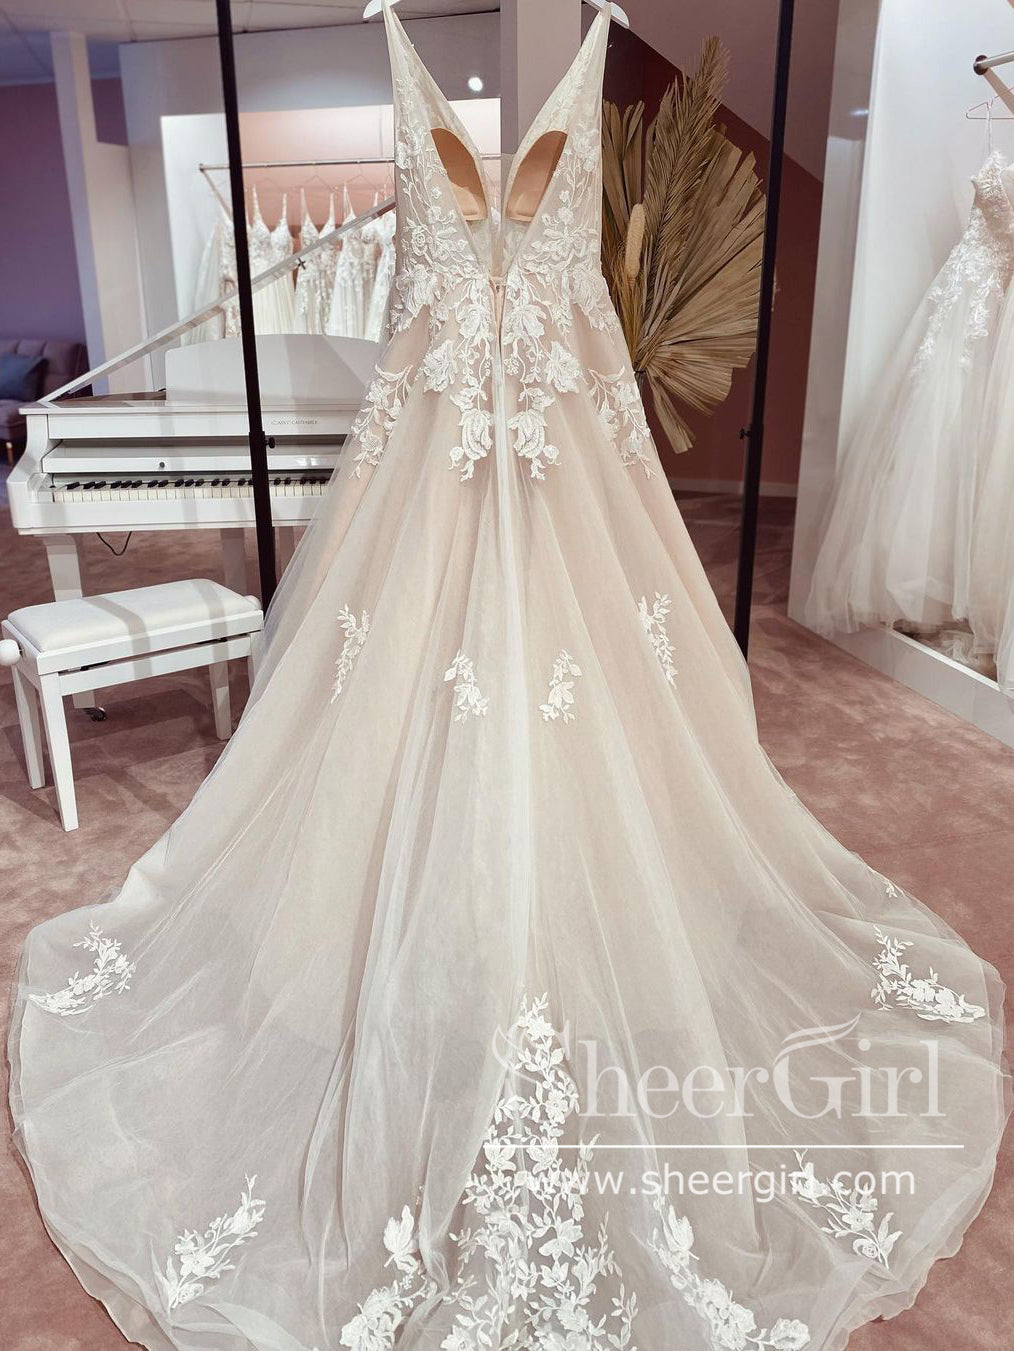 Mermaid Long Sleeve Wedding Dress Made to Order, Sexy Plunge Neck Sparkling  Lace Bridal Gown With Low Back and Long Sleeves -  Denmark